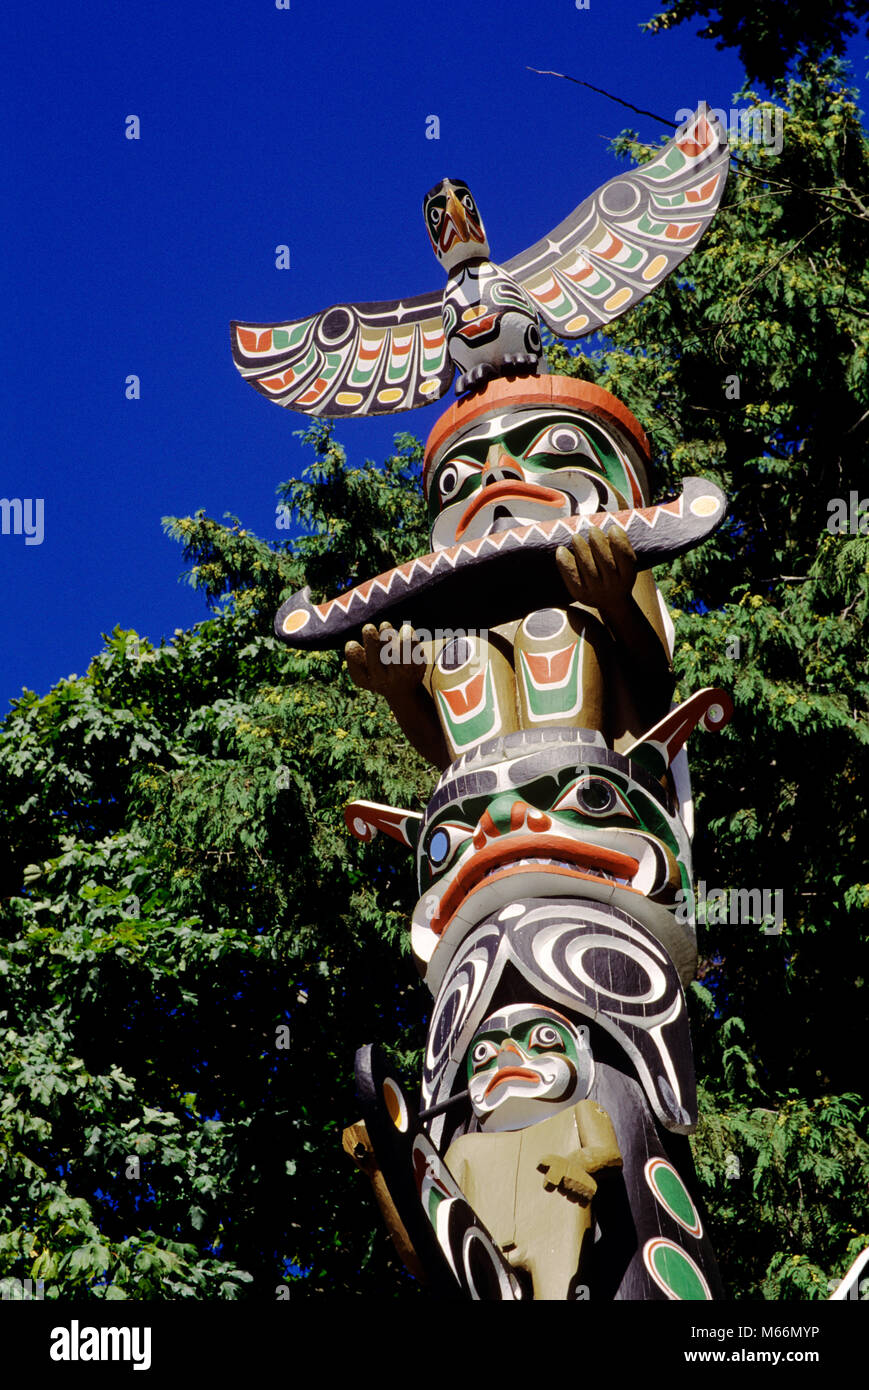 1990s TOTEM POLE IN STANLEY PARK VANCOUVER BRITISH COLUMBIA CANADA - kr104076 KRU001 HARS PAINTED CONNECTION CREATIVITY IMAGINATION NATIVE AMERICAN PROVINCE SMALL GROUP OF ANIMALS SYMBOLIC POLYCHROME SCULPTURES TOTEM WILDLIFE BC BRITISH COLUMBIA INDIGENOUS INDIGENOUS PEOPLE MONUMENTAL MONUMENTAL SCULPTURES OLD FASHIONED PACIFIC NORTHWEST COAST PROVINCES STANLEY PARK TOTEMS TRAVEL CANADA VANCOUVER Stock Photo